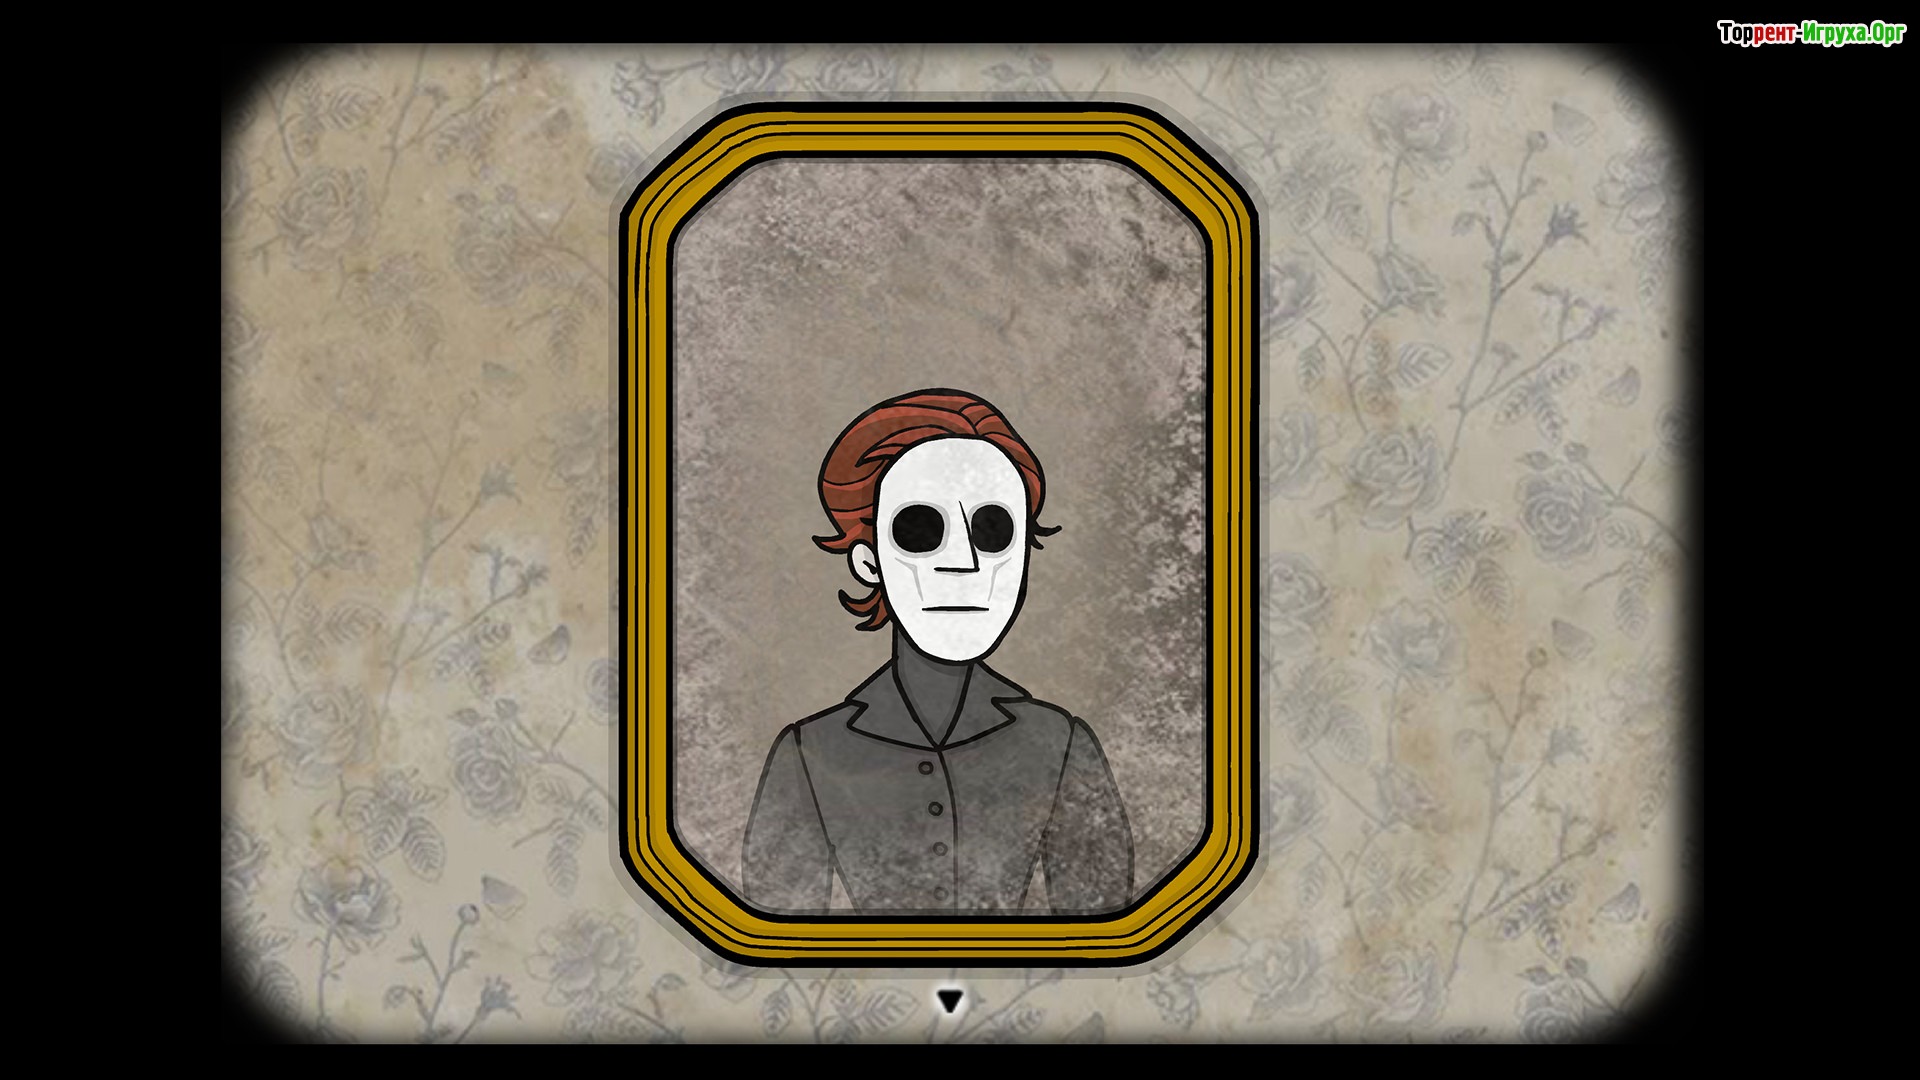 The past within rusty. Игра Rusty Lake the past within. Расти Лейк the past within. Расти Лейк Парадайс Дэвид.